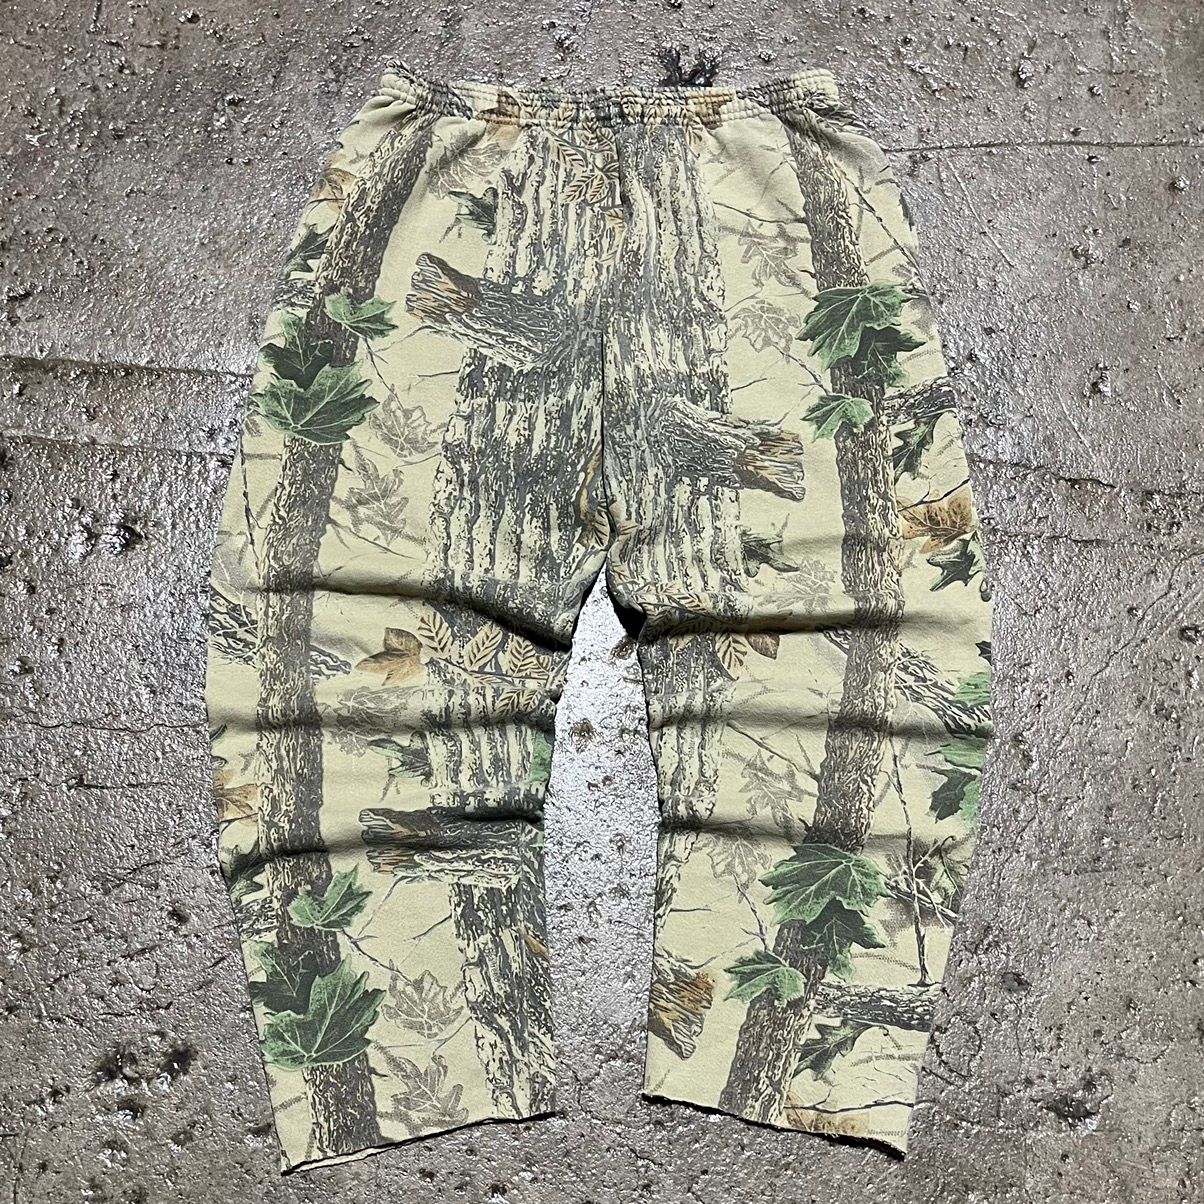 Pre-owned Camo X Carhartt Crazy Y2k Camo Carhartt Style Sweatpants Realtree Skater